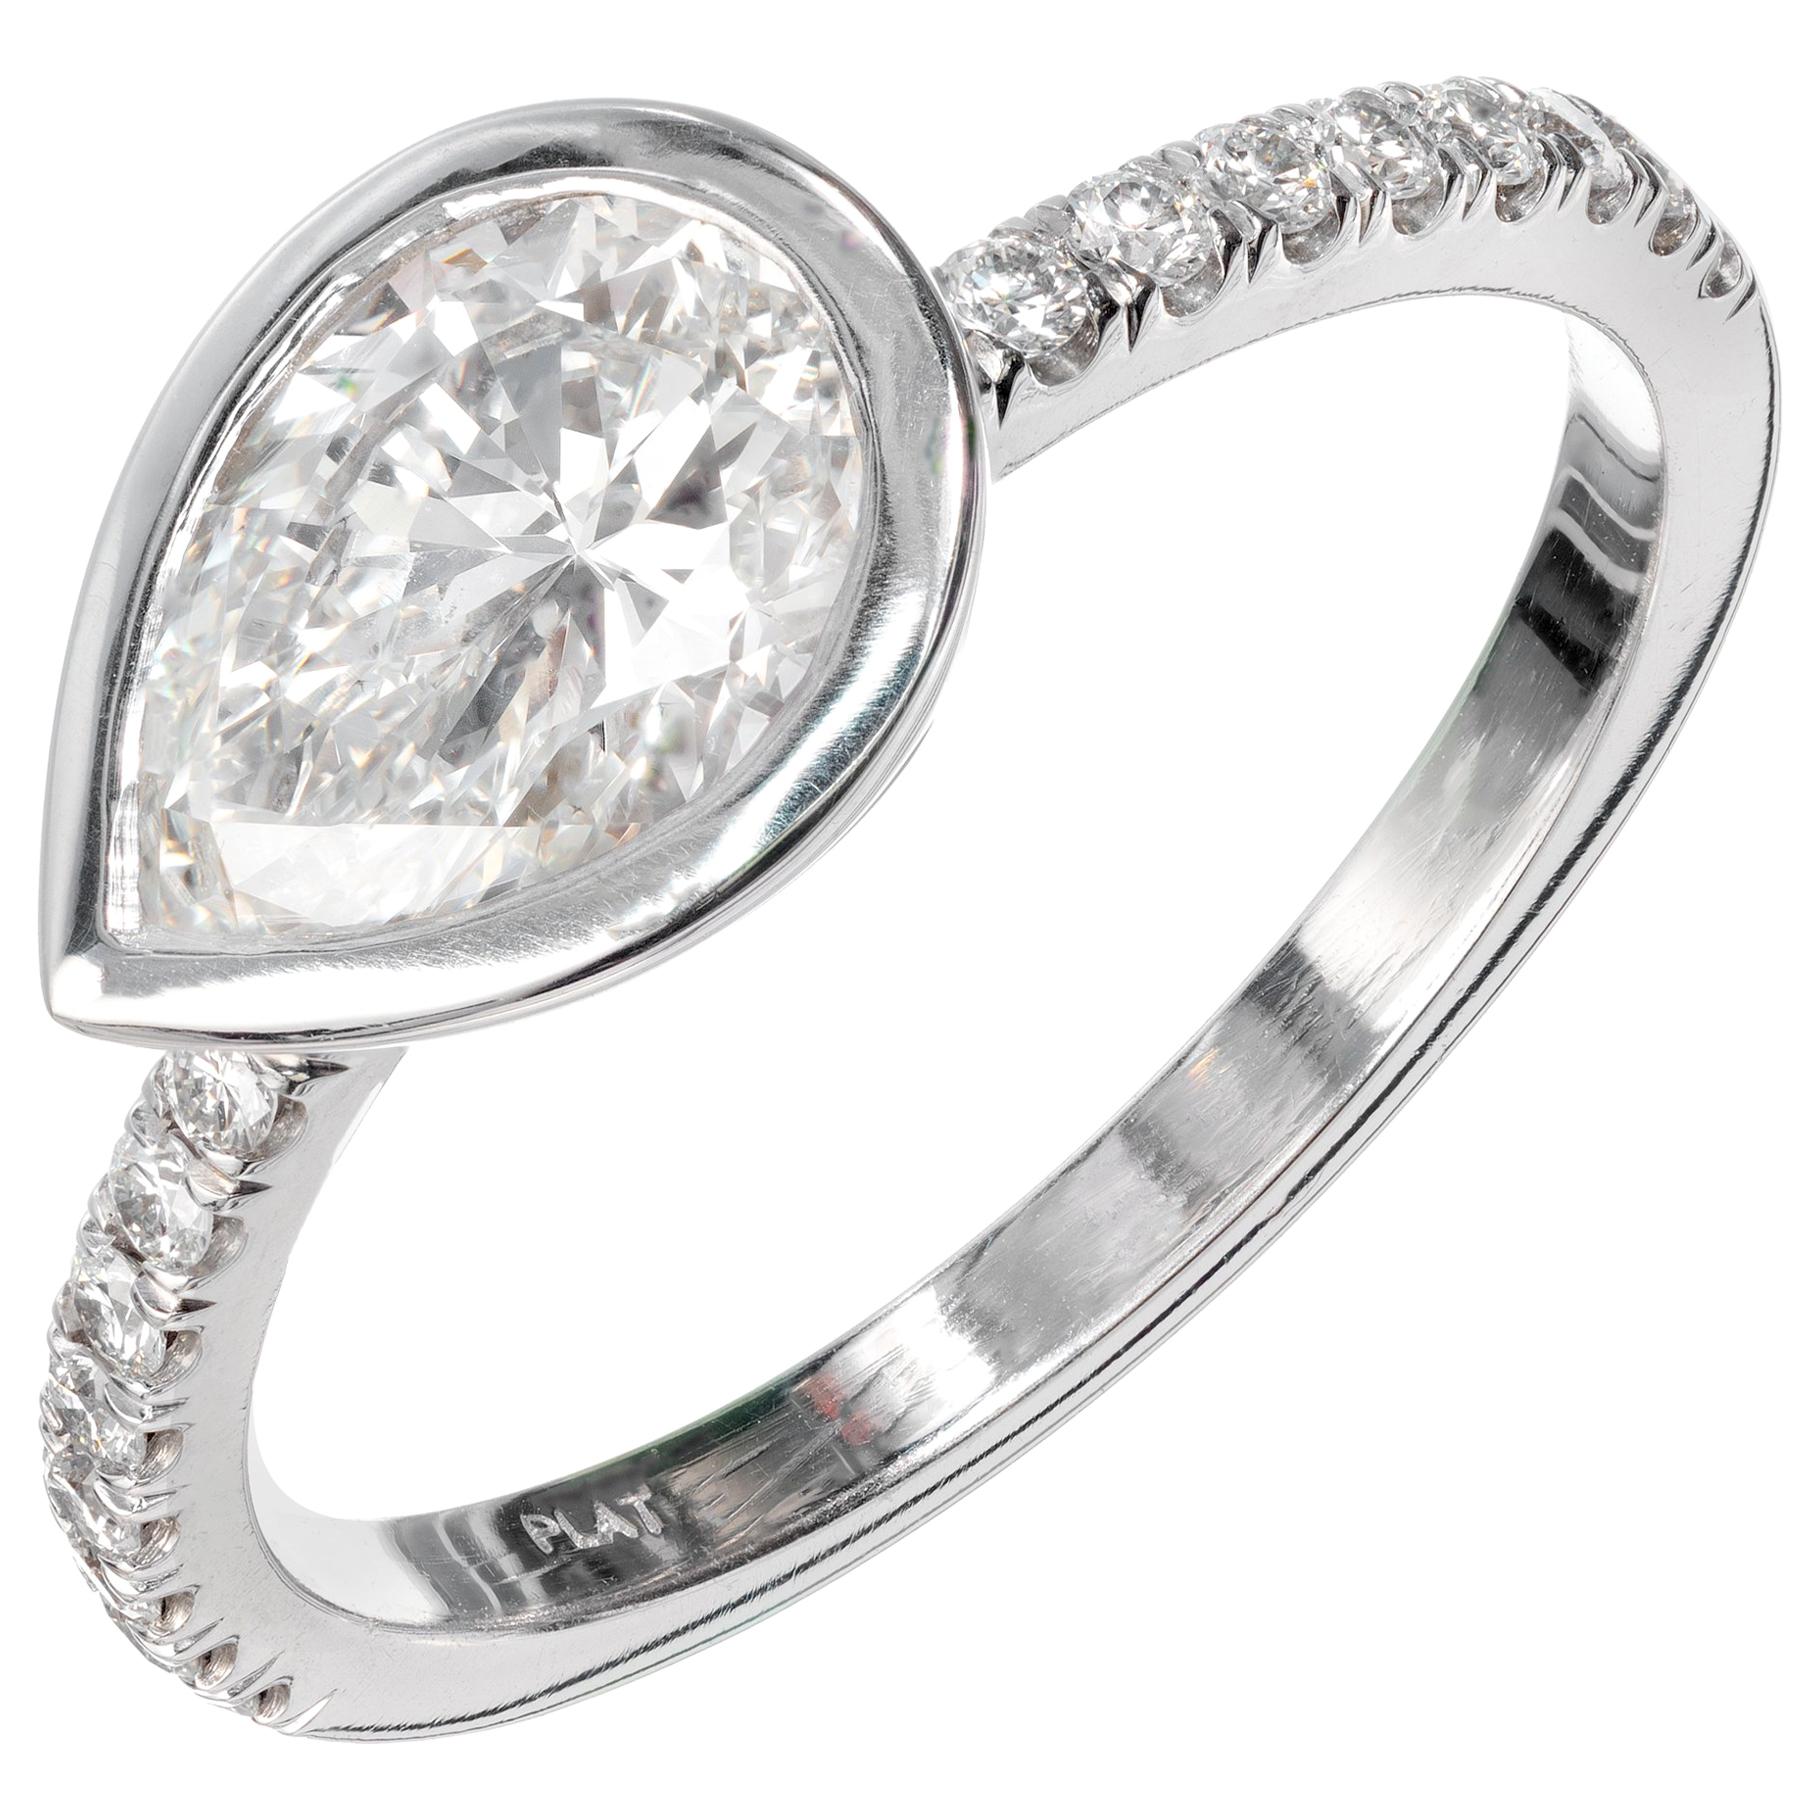 Peter Suchy GIA Certified 1.27 Carat Diamond Platinum Engagement Ring For Sale